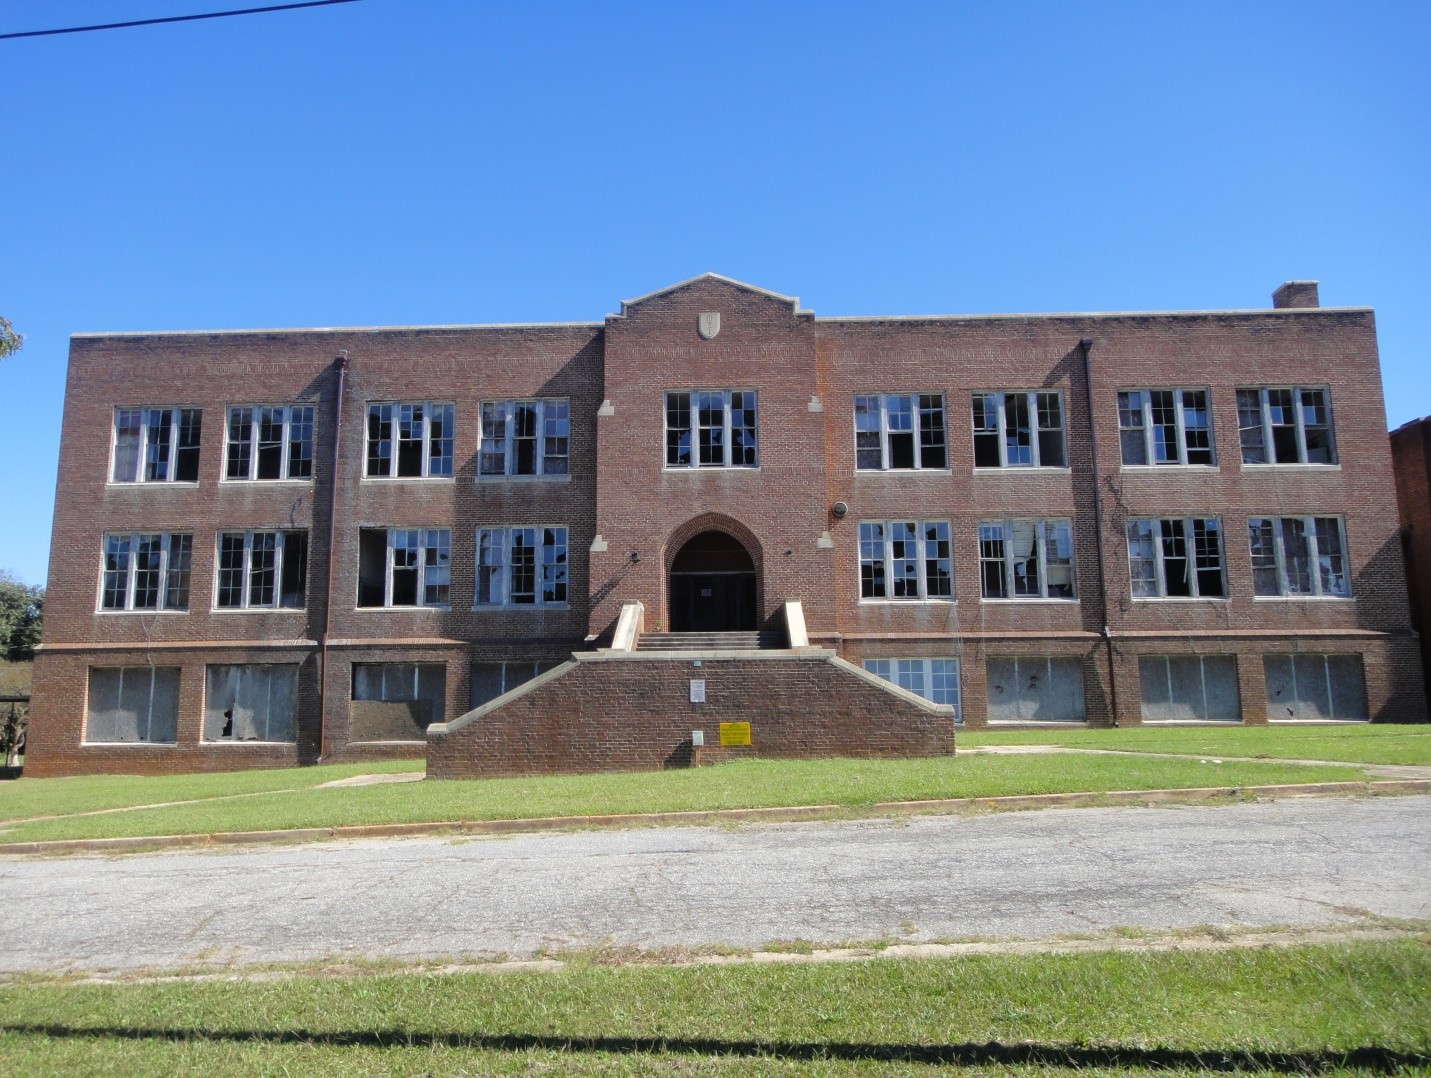 Picture 1_West Elevation of Classroom Bldg.jpg